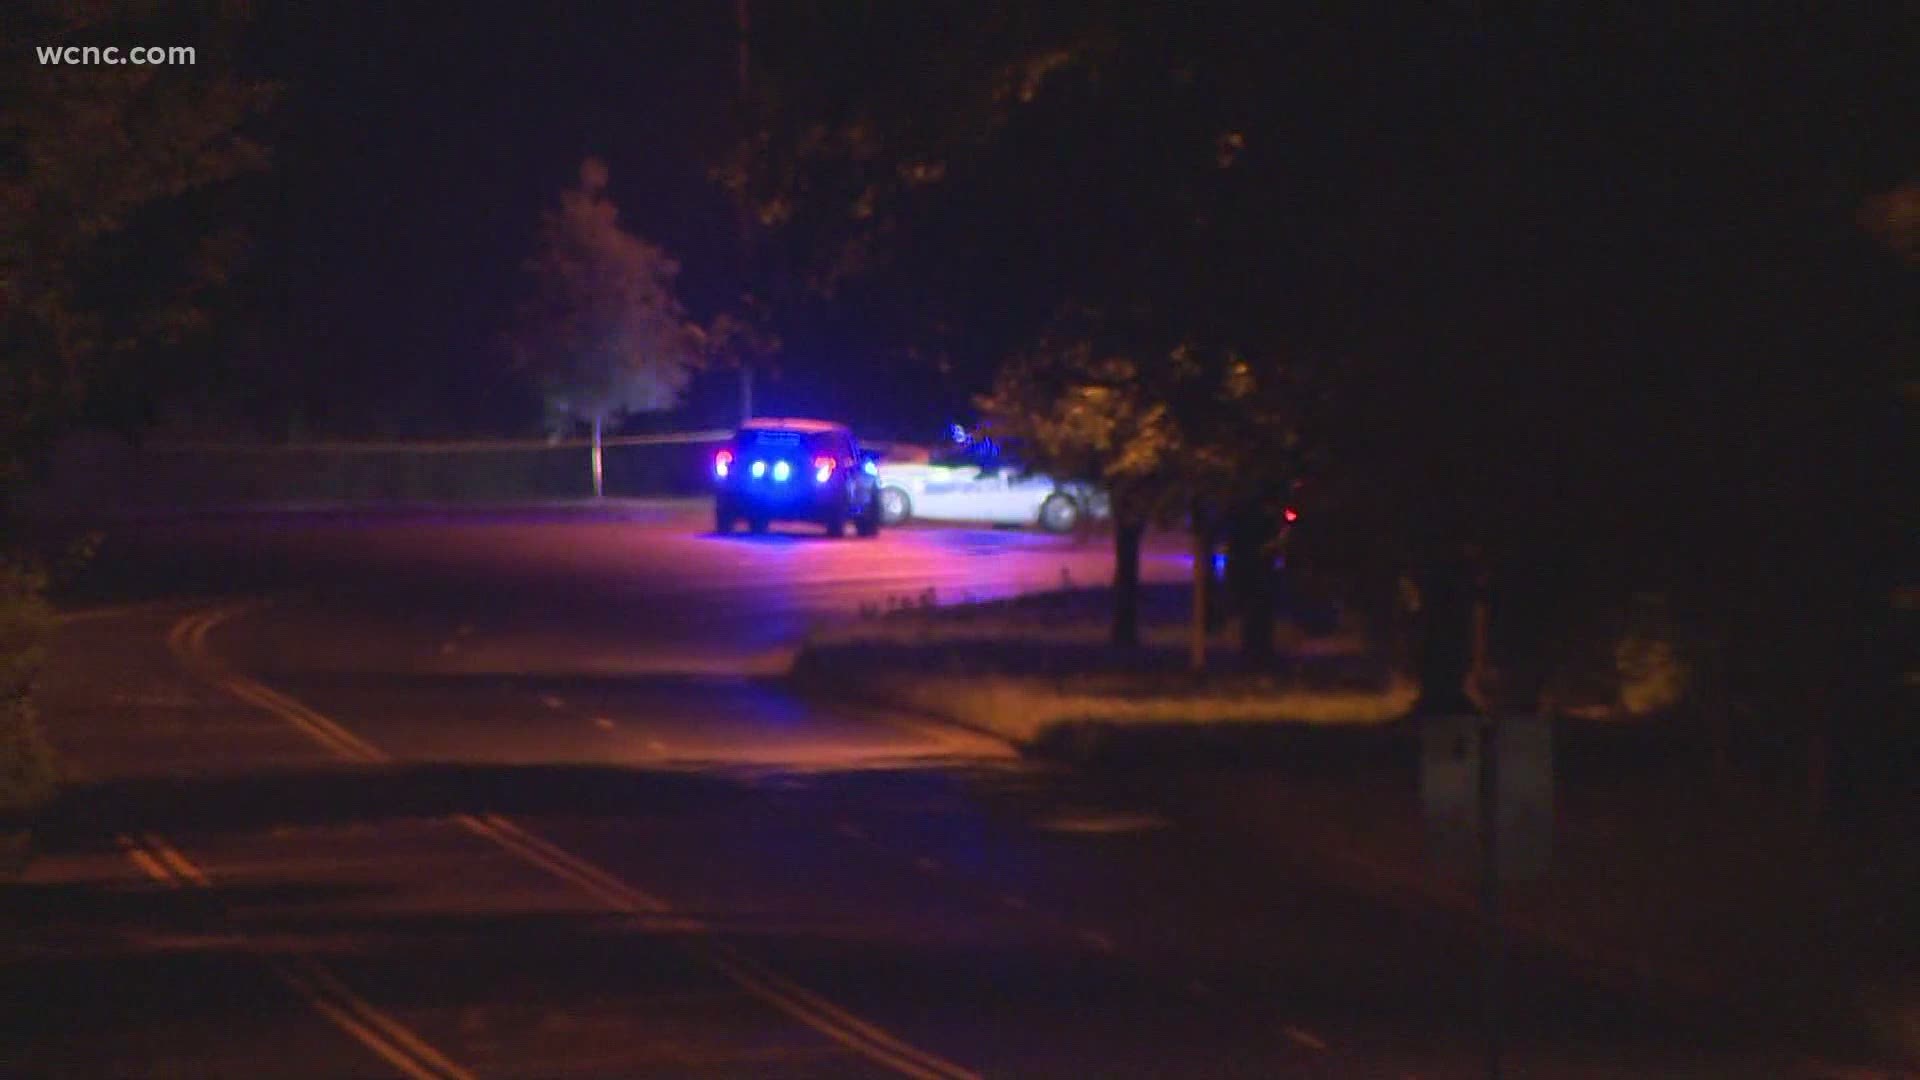 CMPD says one person was pronounced dead at the scene, and two others were taken to the hospital for their injuries.